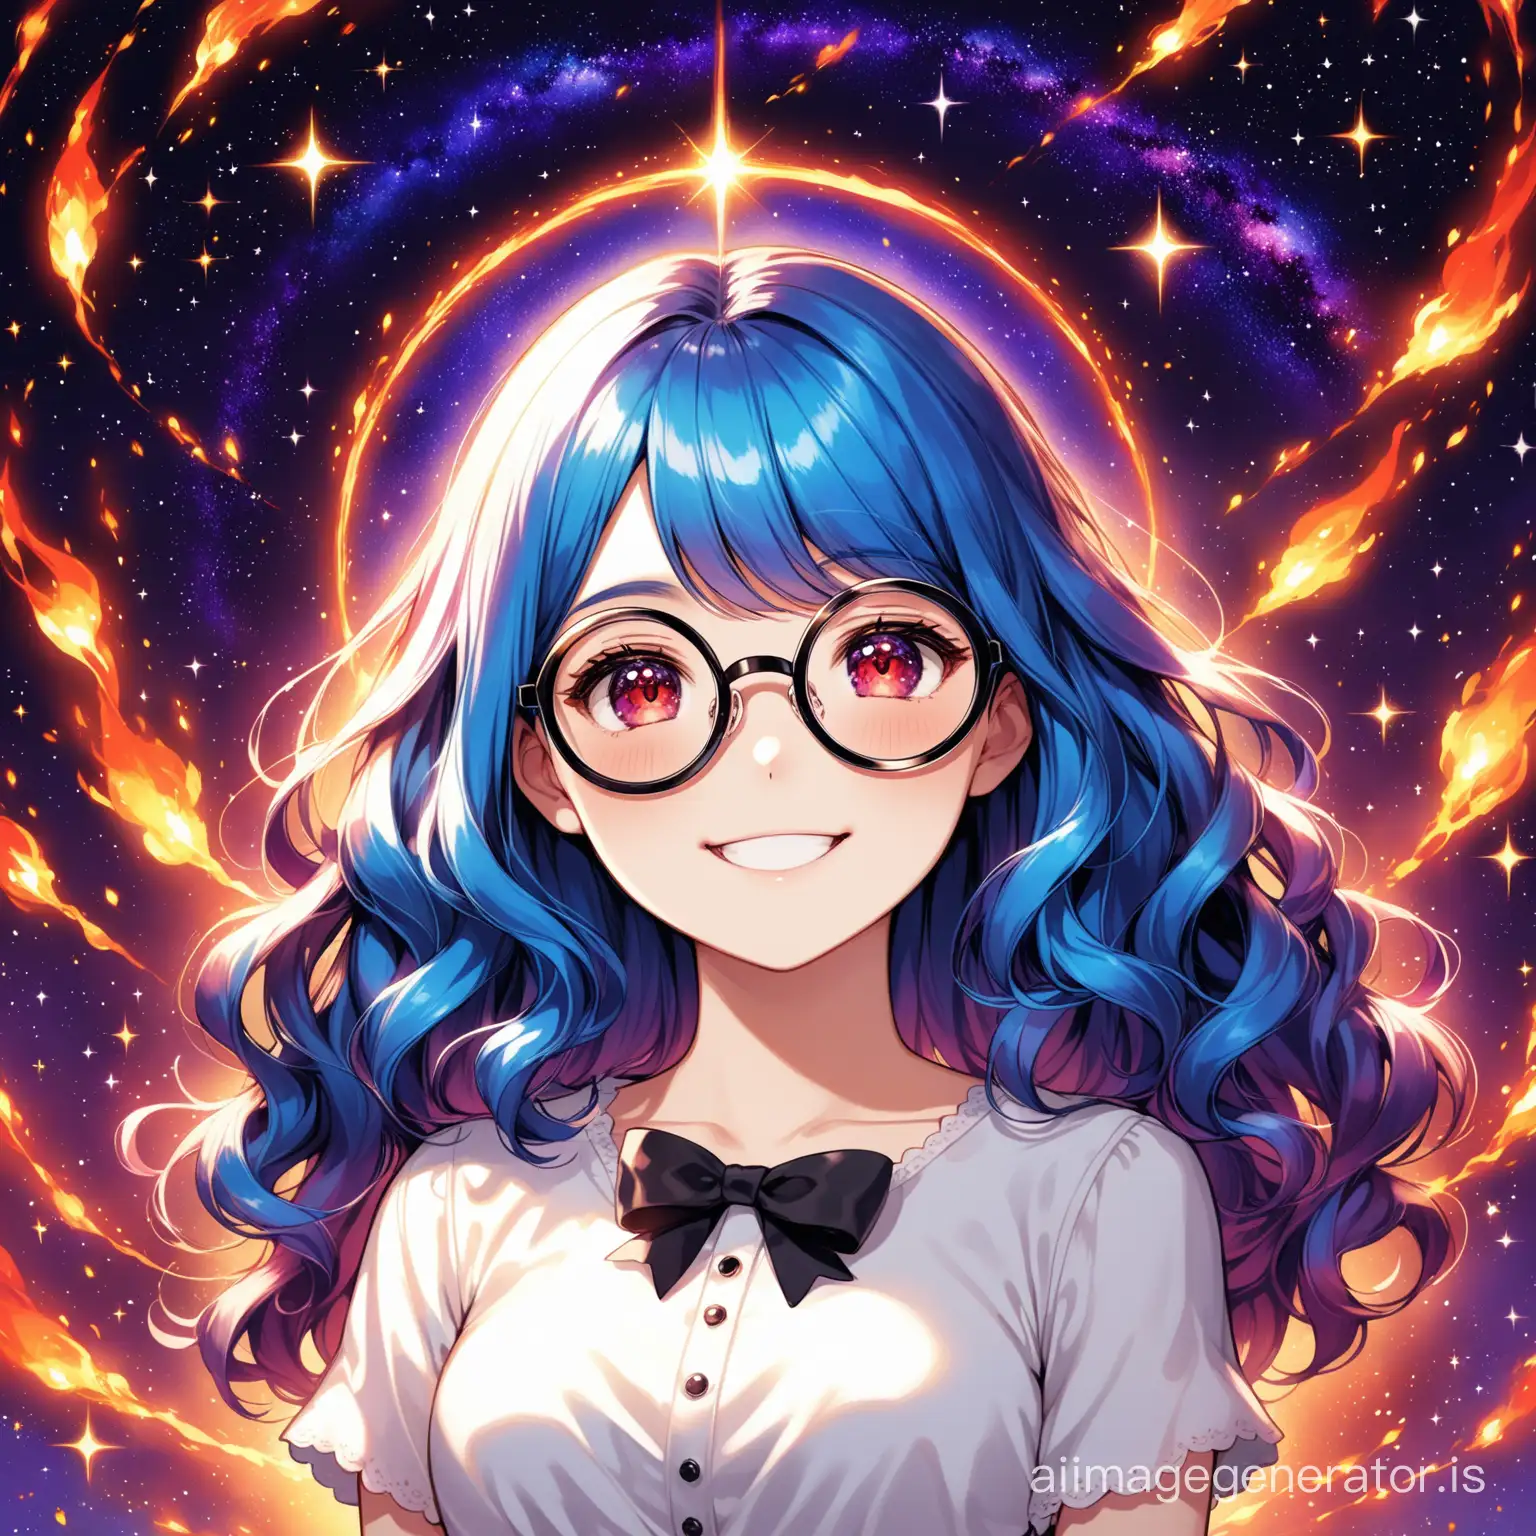 The girl with blue hair, her hair shining red, she has red eyes, wearing big round glasses, in a beautiful black and white dress, her hair slightly curly, with 2 cute white bows on her head, she's smiling, in the background there are a few sparks resembling fire, in the background there is a starry sky and the outline of another galaxy of purple color is visible